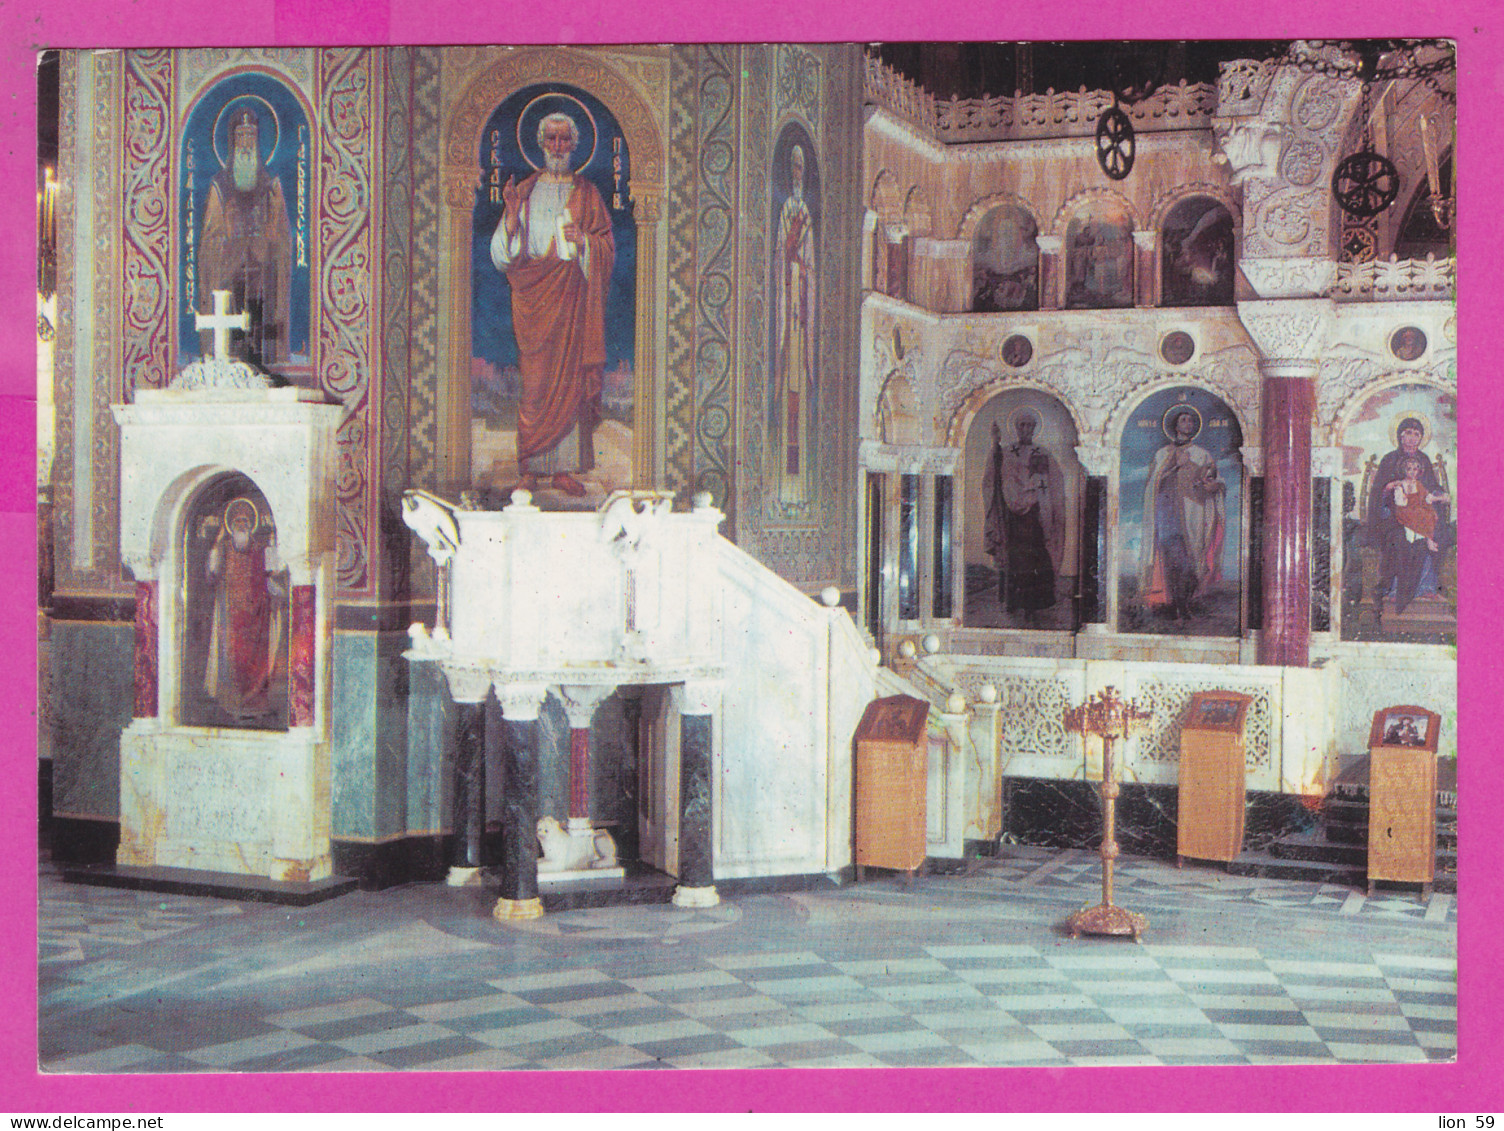 311273 / Bulgaria - Sofia - The Pulpit And Part Of Central Altar - Patriarchal Cathedral Of St. Alexander Nevsky 1979 PC - Eglises Et Cathédrales